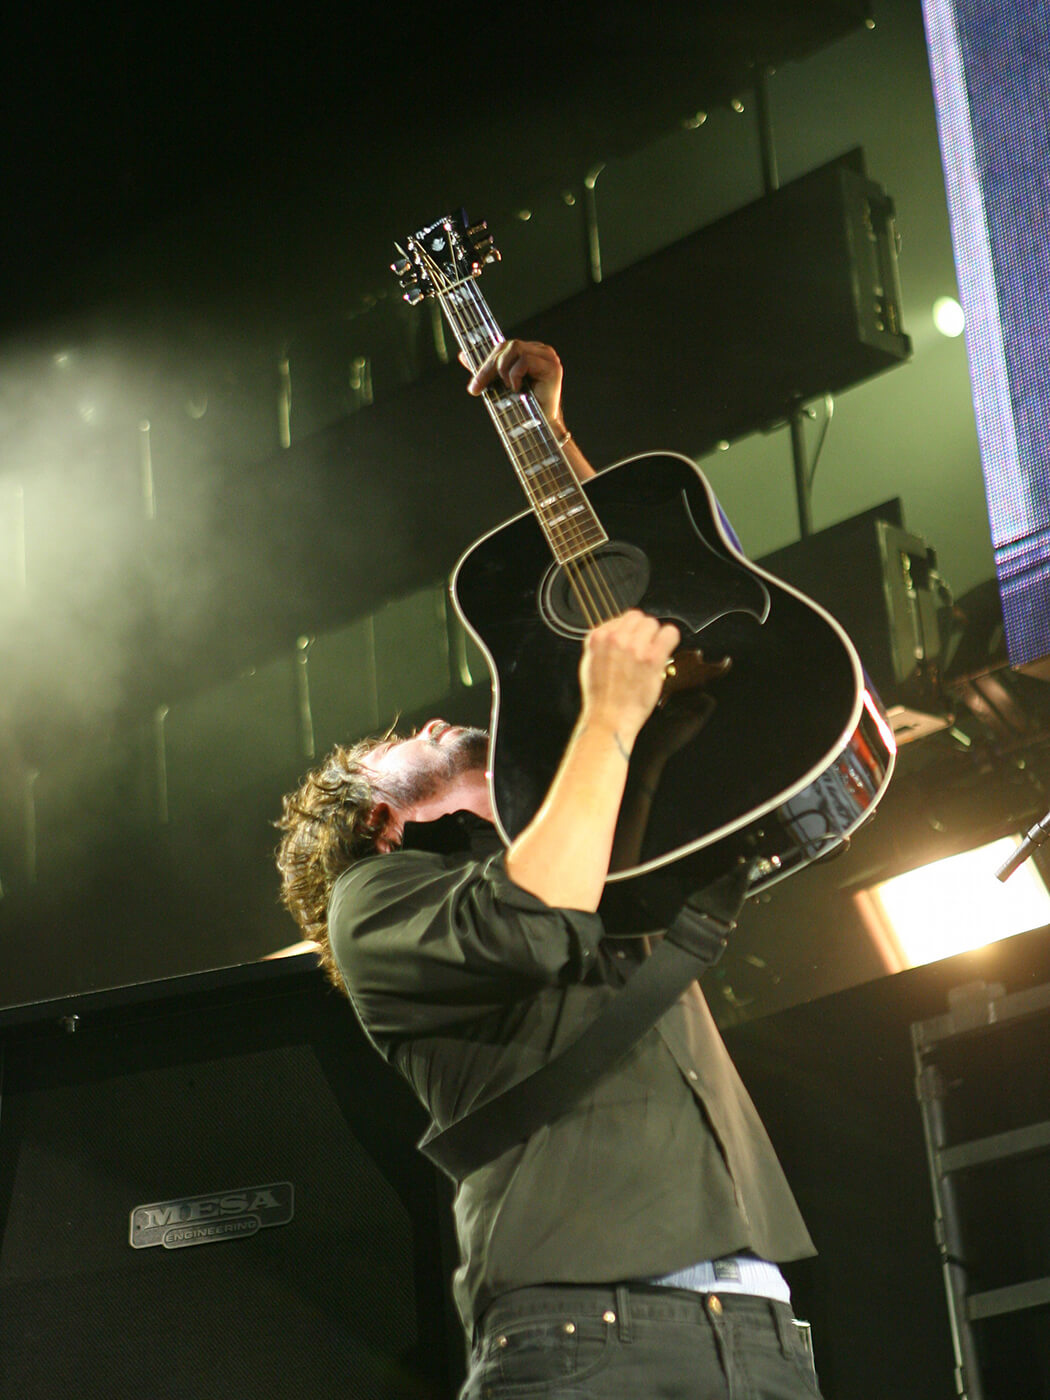 Dave Grohl performing with a Gibson Elvis Presley Dove in 2006, photo by John Shearer/WireImage via Getty Images